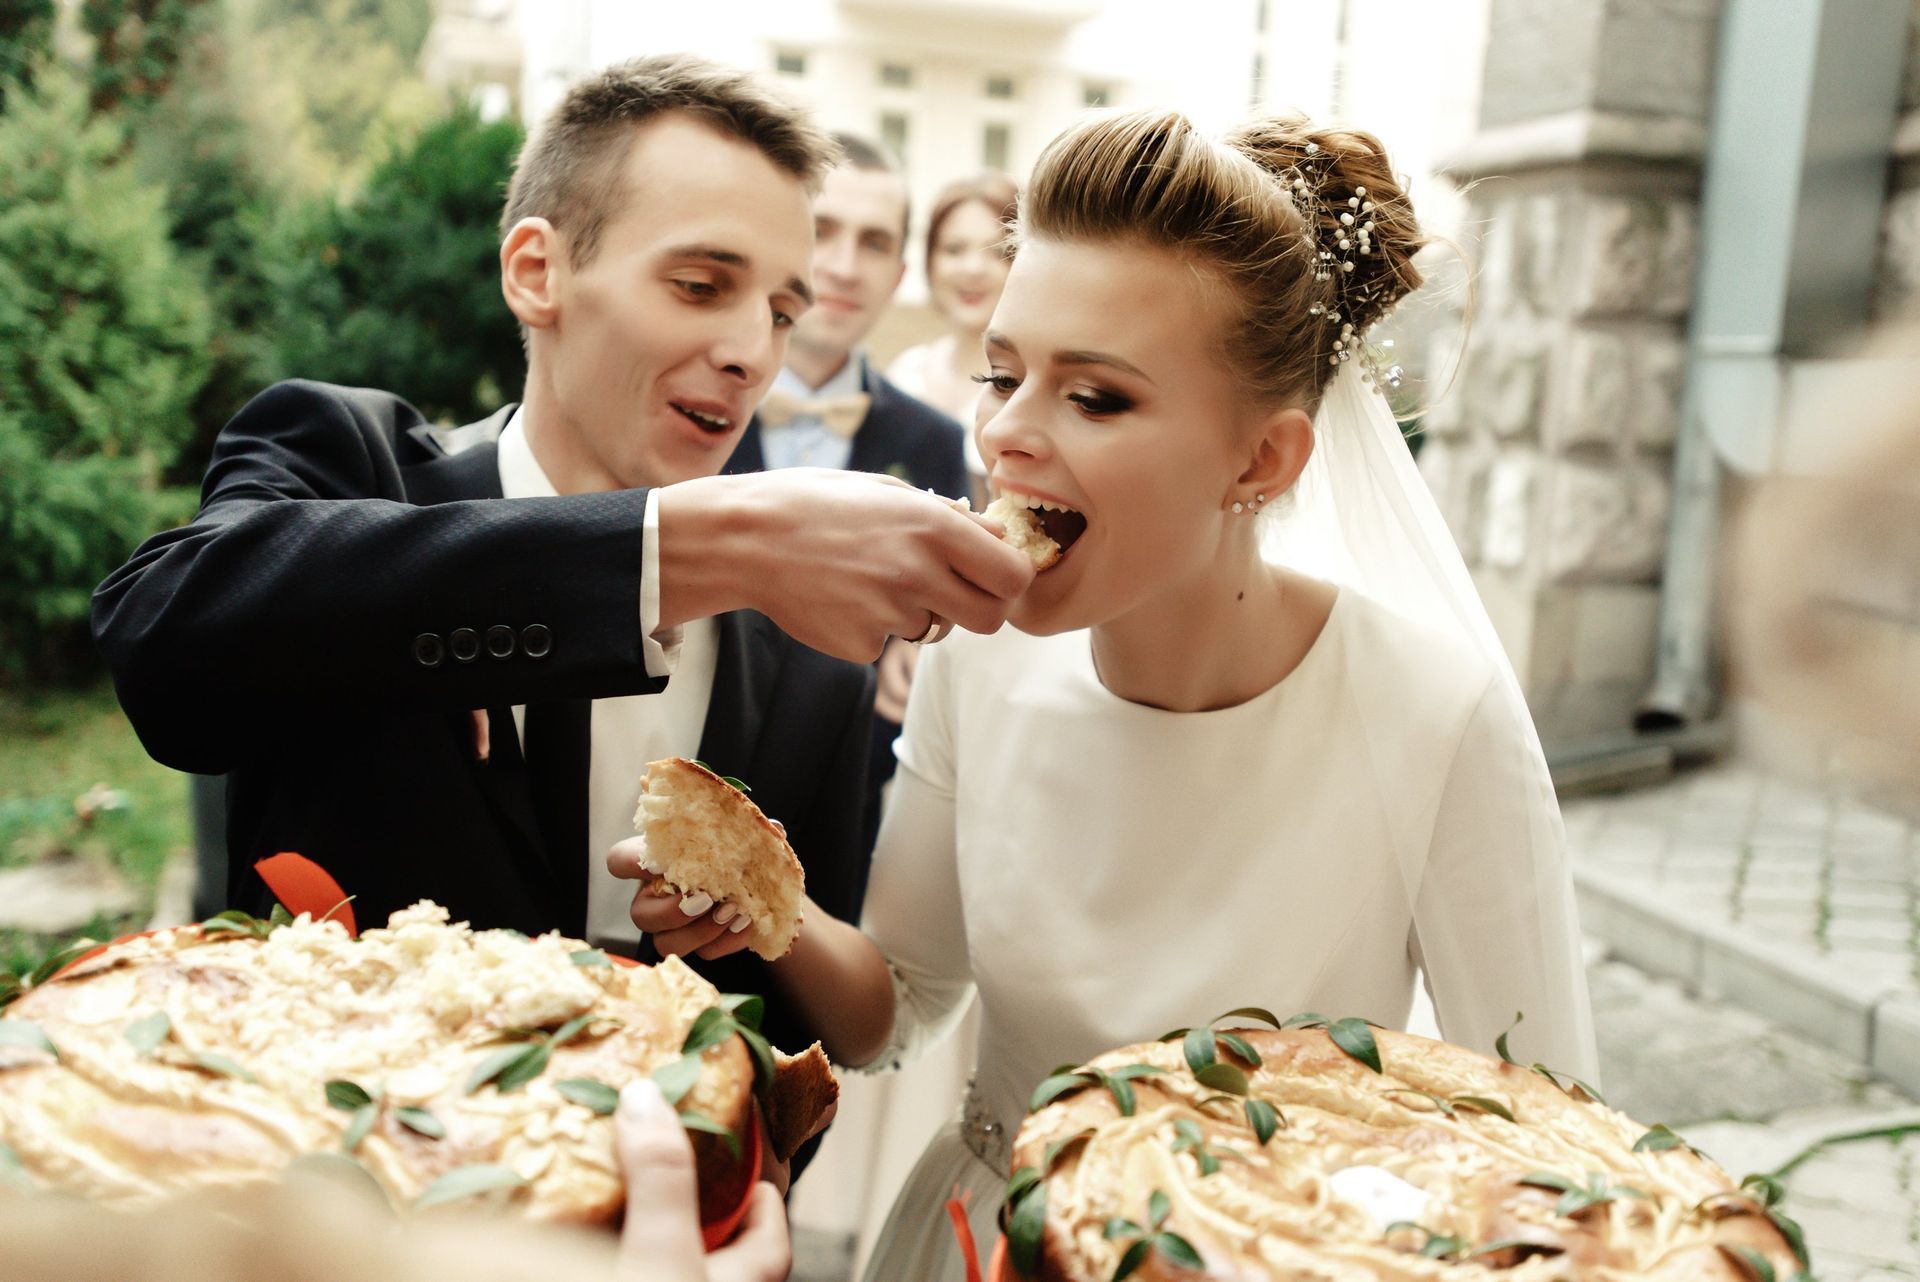 a bride and groom are eating a cake together at their wedding